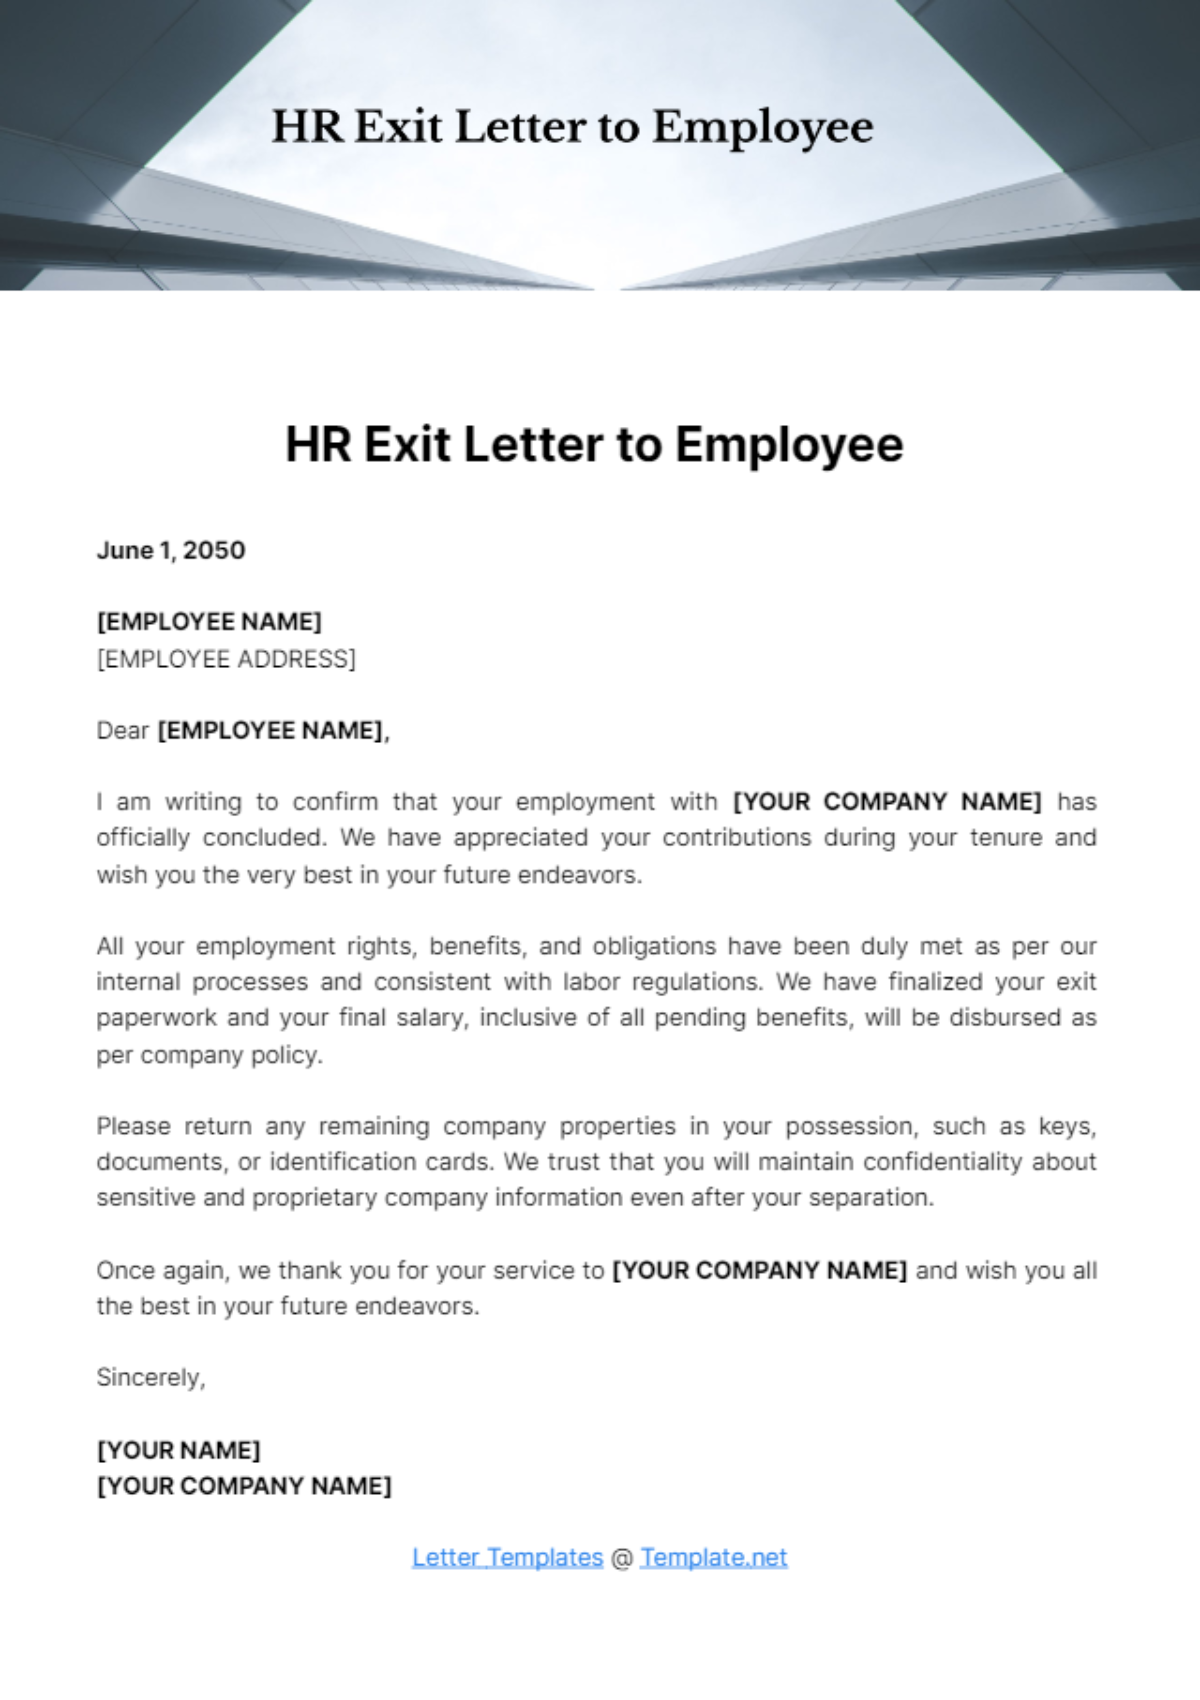 Free HR Exit Letter to Employee Template